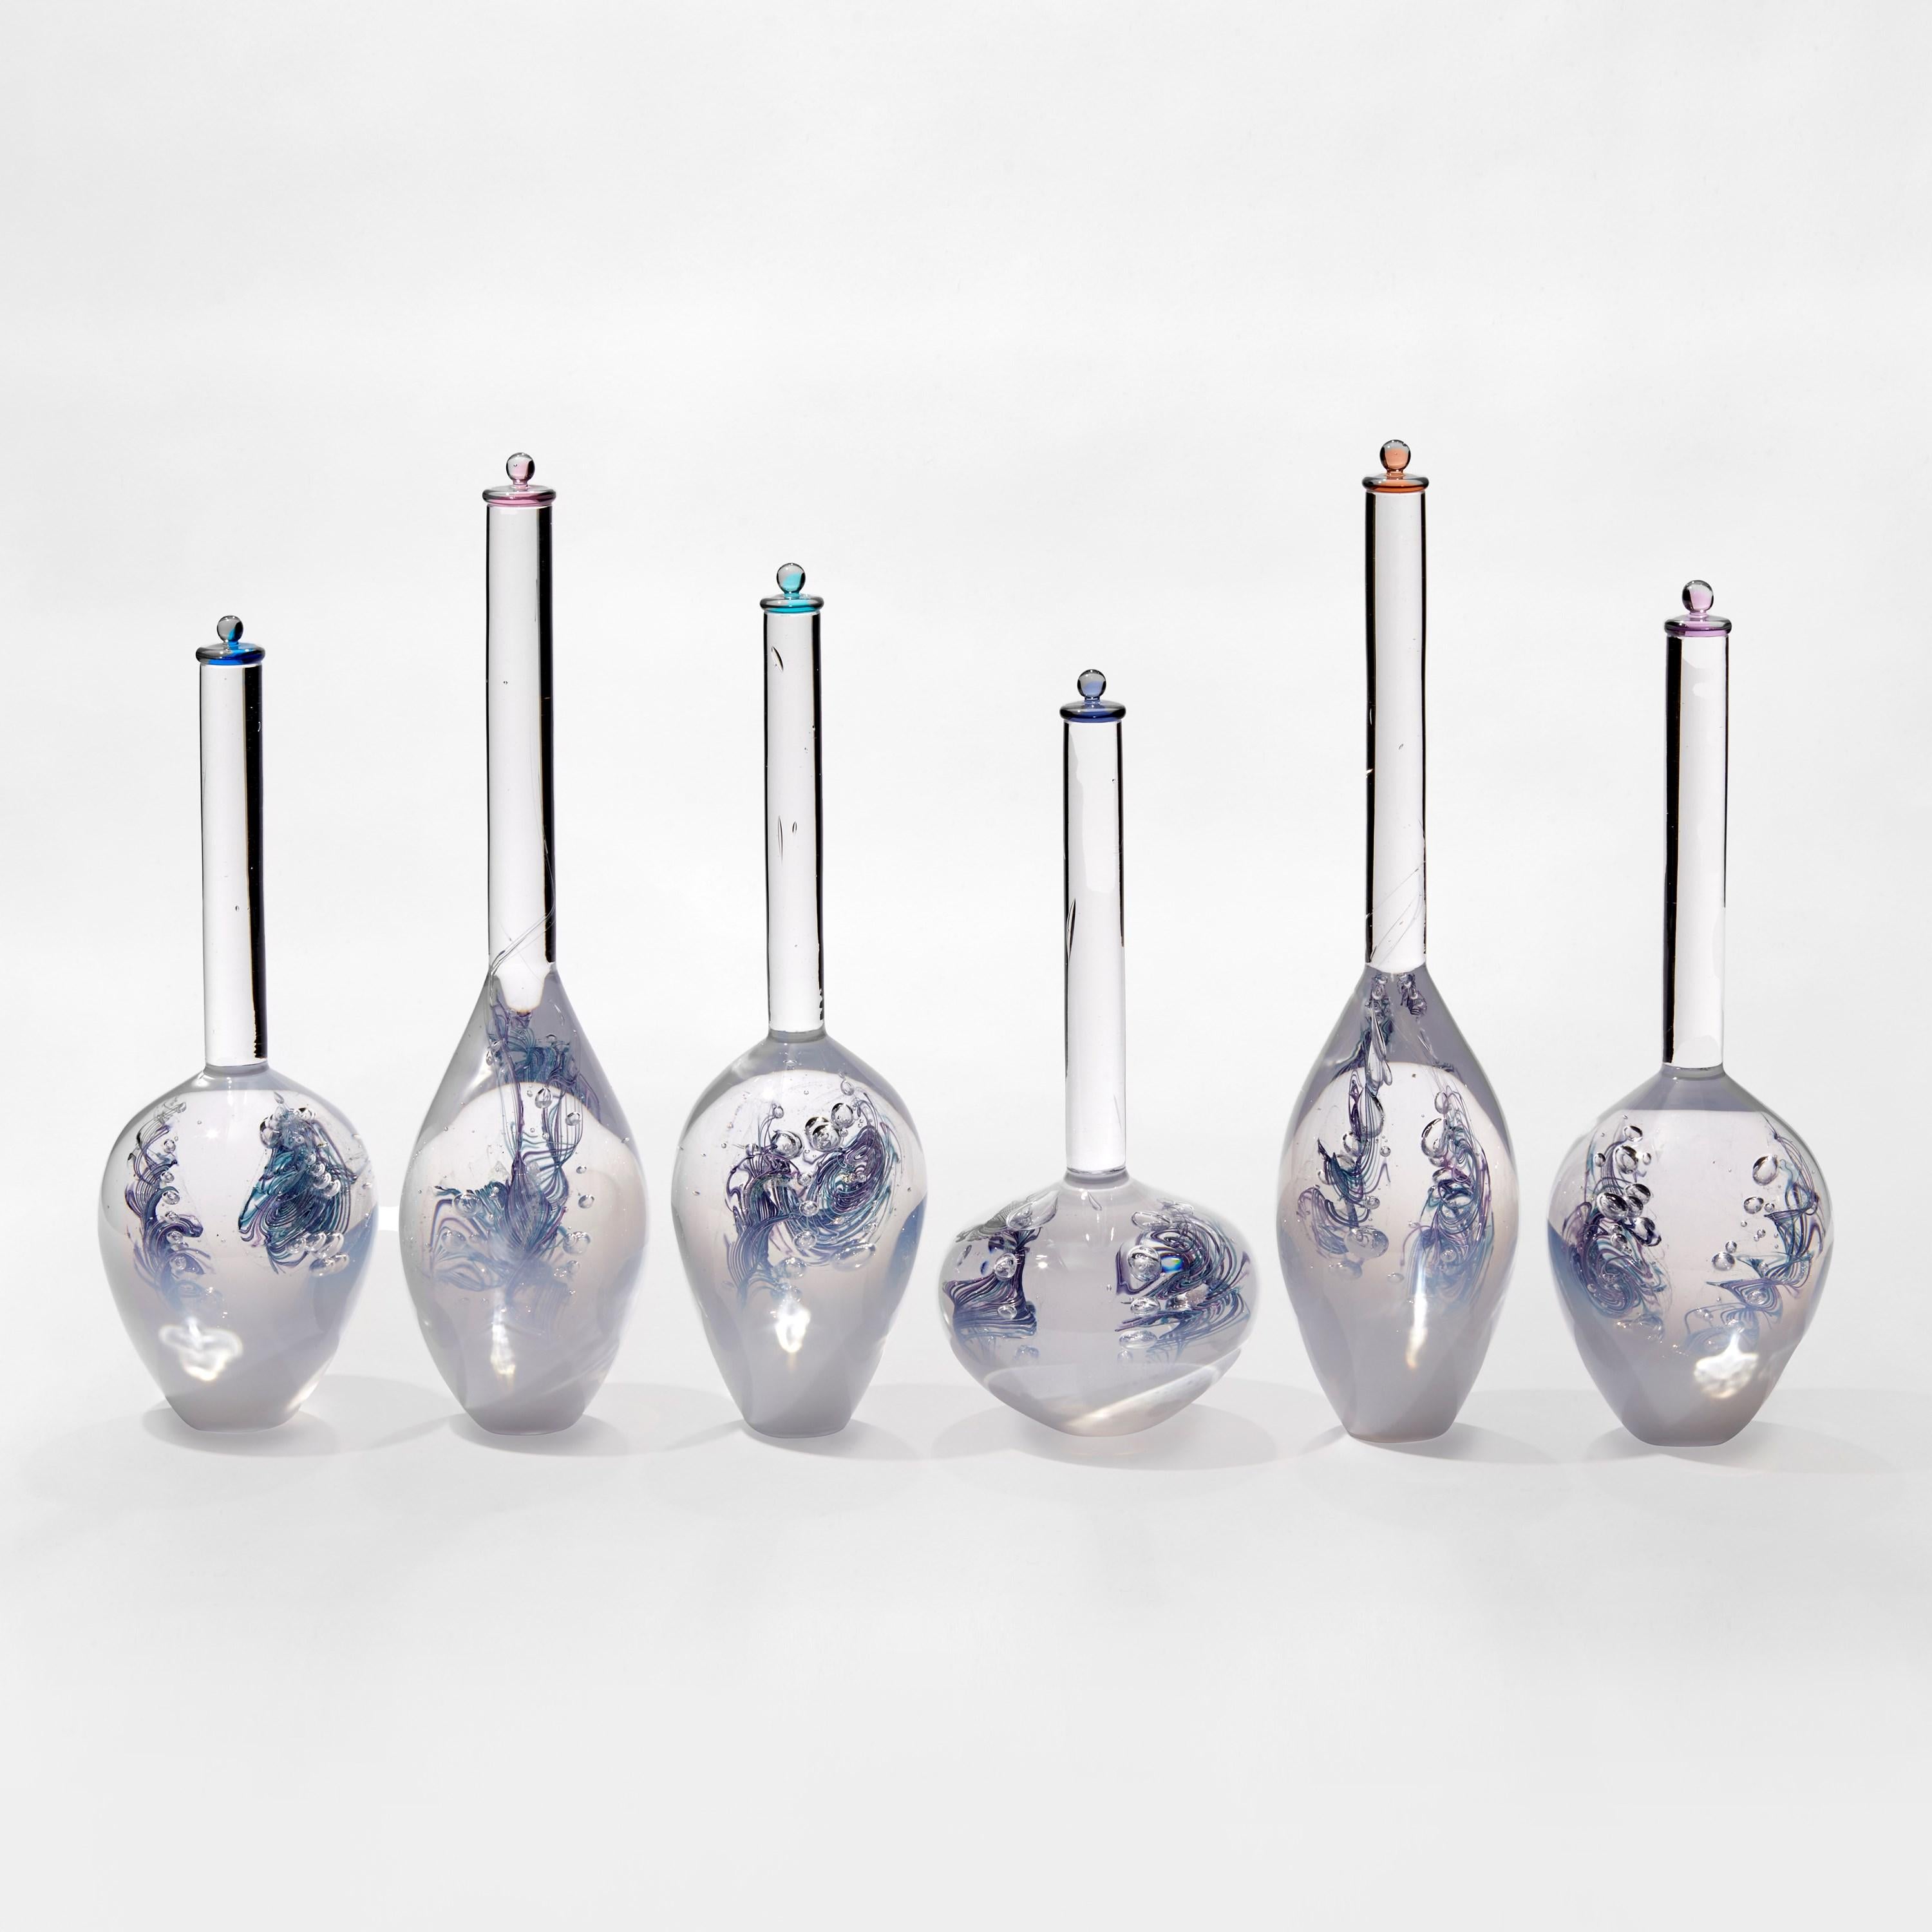 'Dancing Genes Allel 1' is a unique glass installation (consisting of 6 individual elements) by the British artist, Louis Thompson.

The price shown excludes the display plinth, stand and lighting as shown in the subsequent images, which also